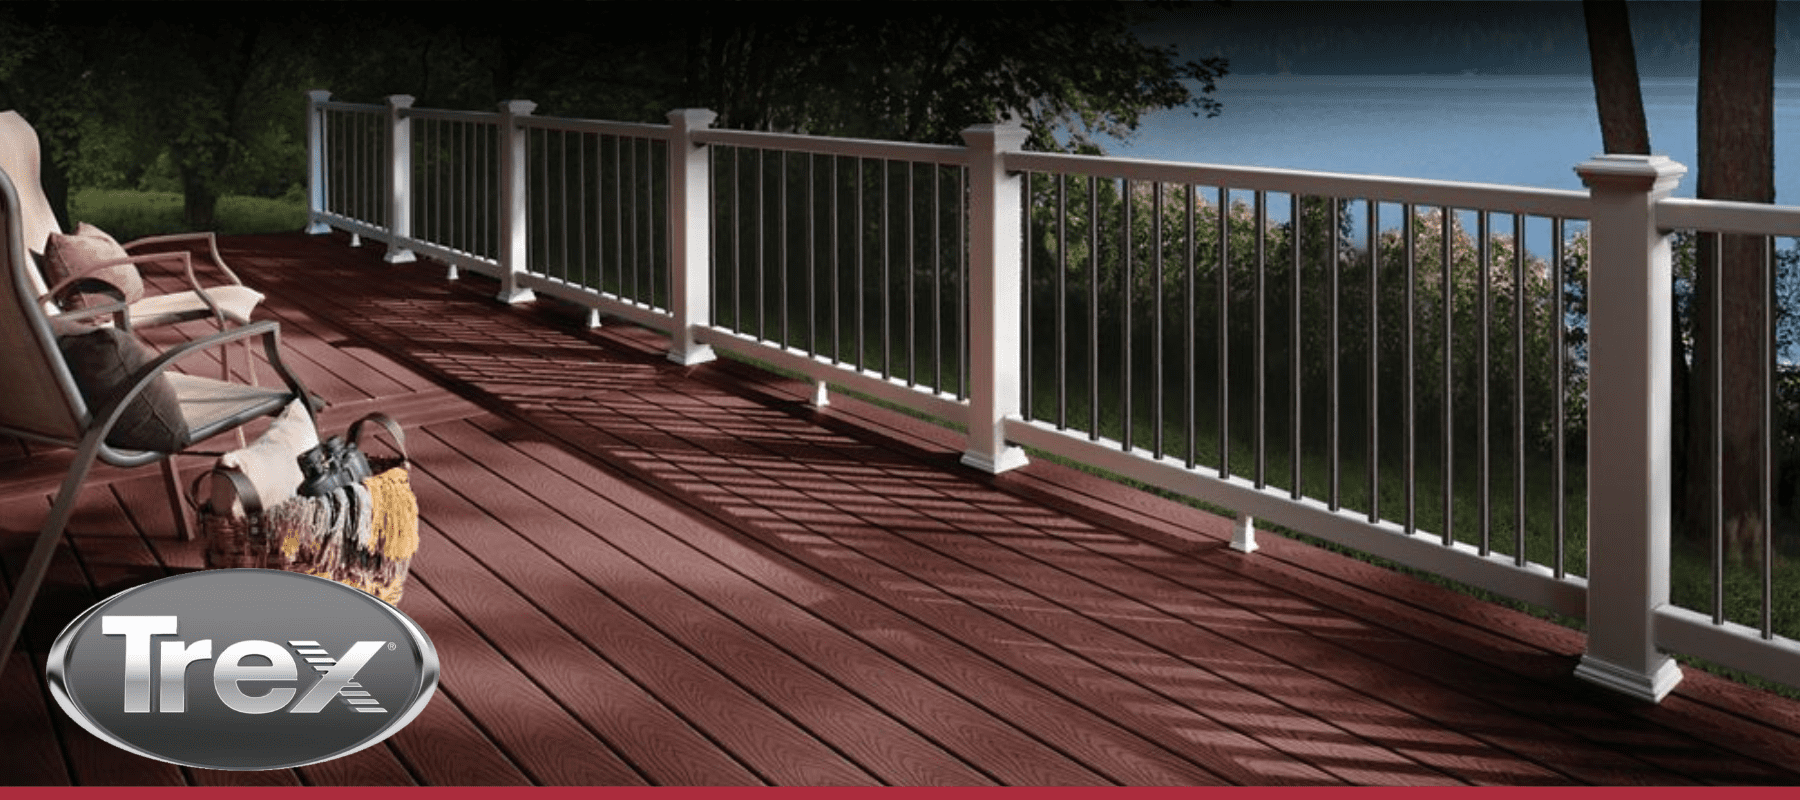 Trex composite decking available at gilford home center